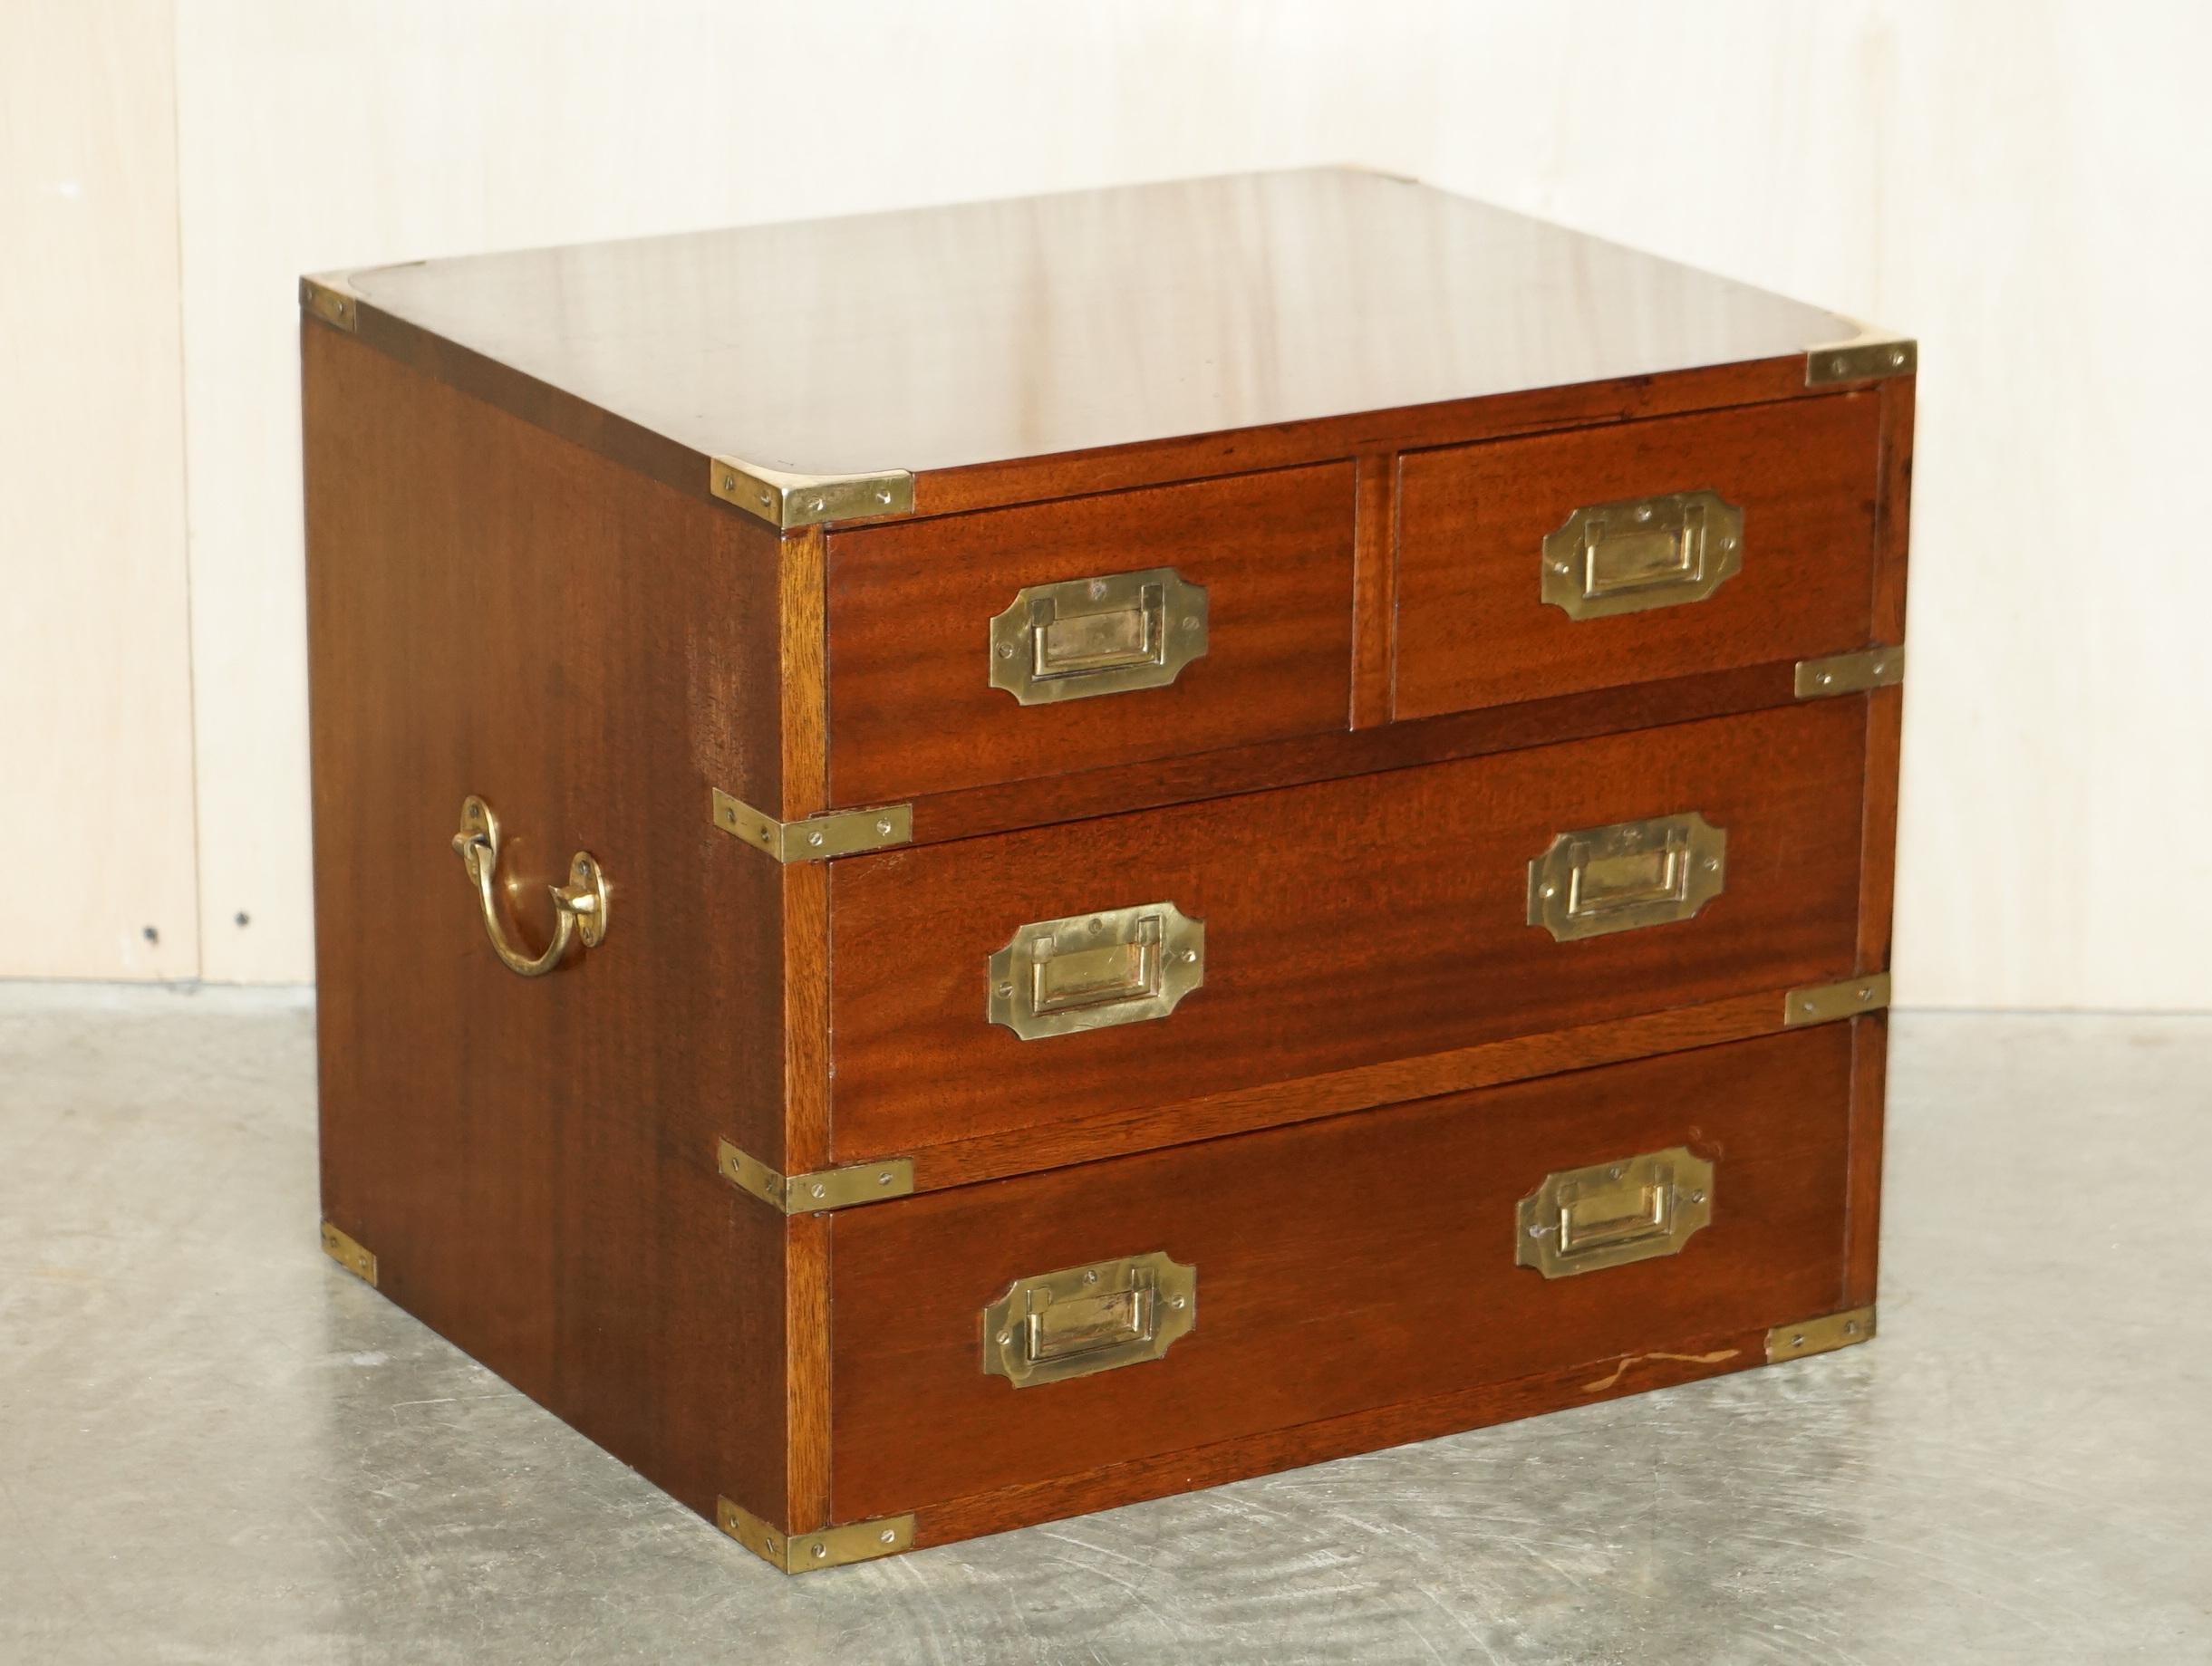 We are delighted to offer this sublime pair of vintage Harrods Kennedy Military Campaign side table sized chests of drawers

A truly stunning and well made pair by Kennedy Furniture and retailed through Harrods London

The condition is very